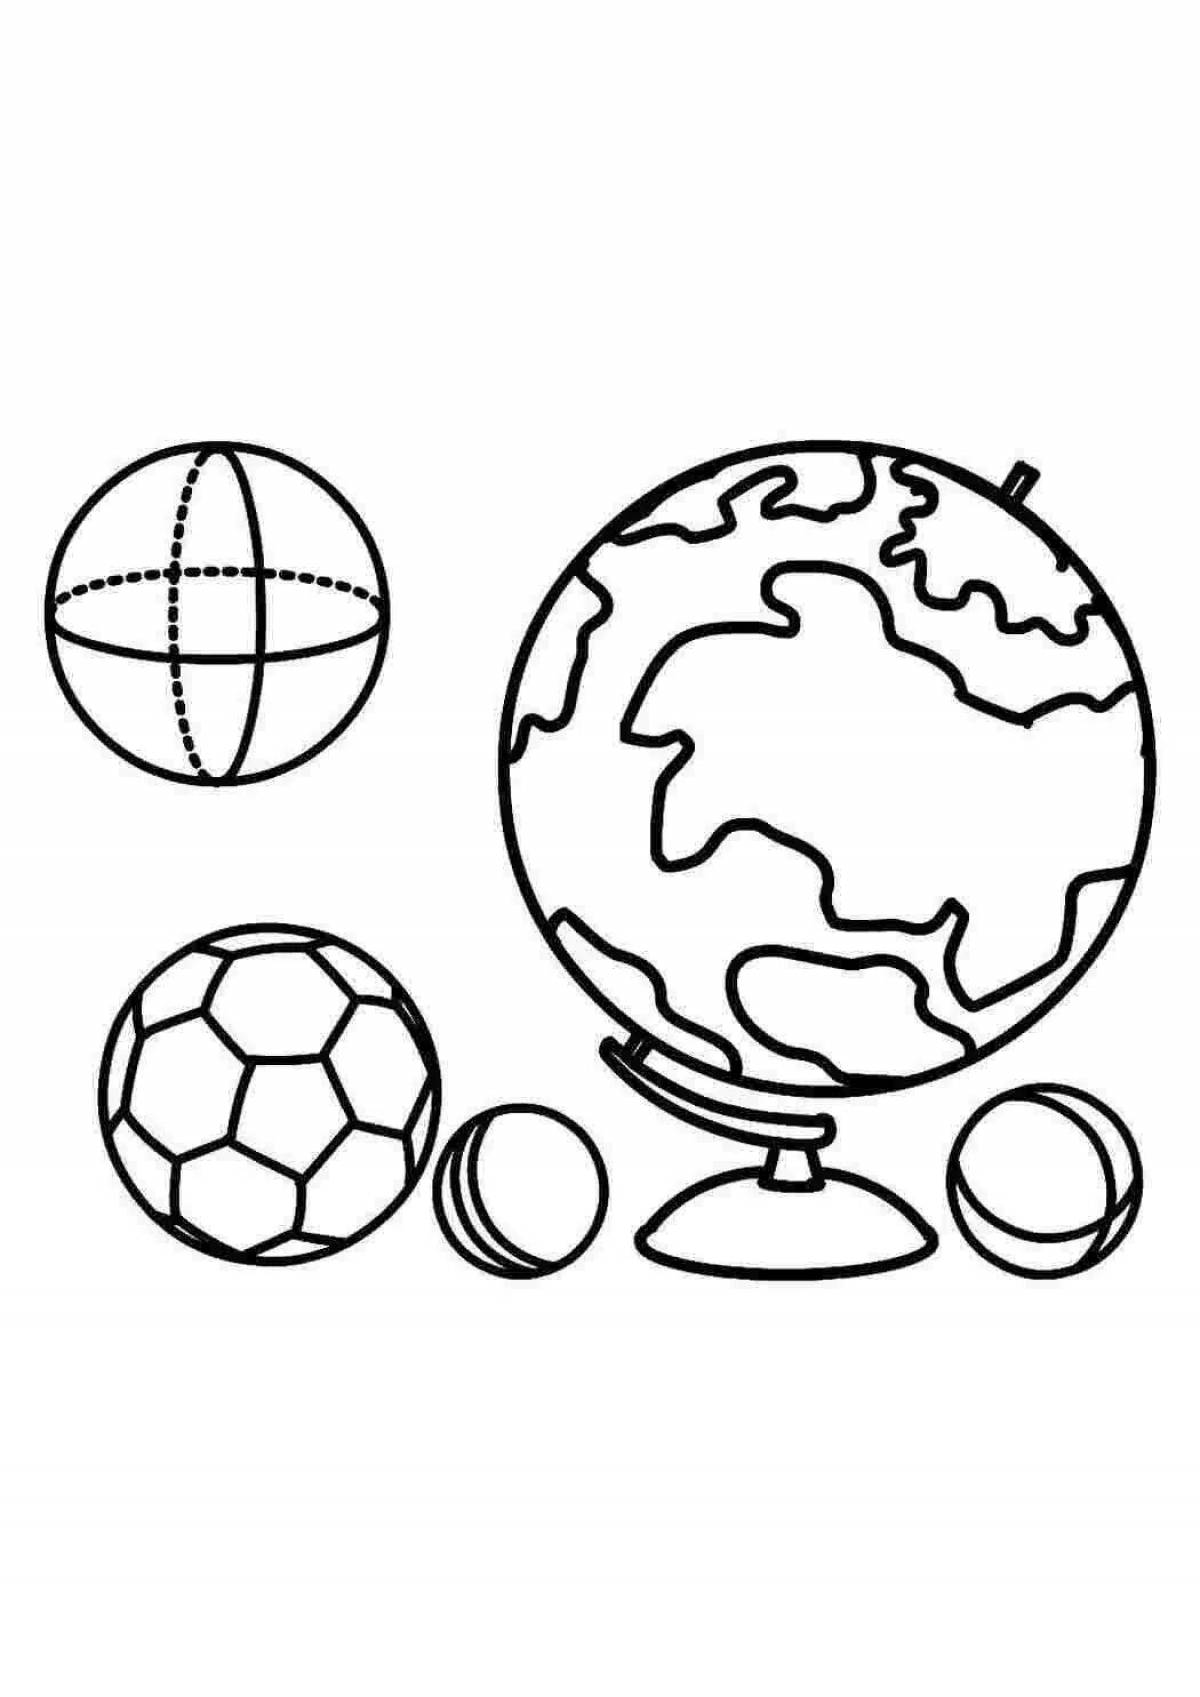 Bright drawing of a globe for children